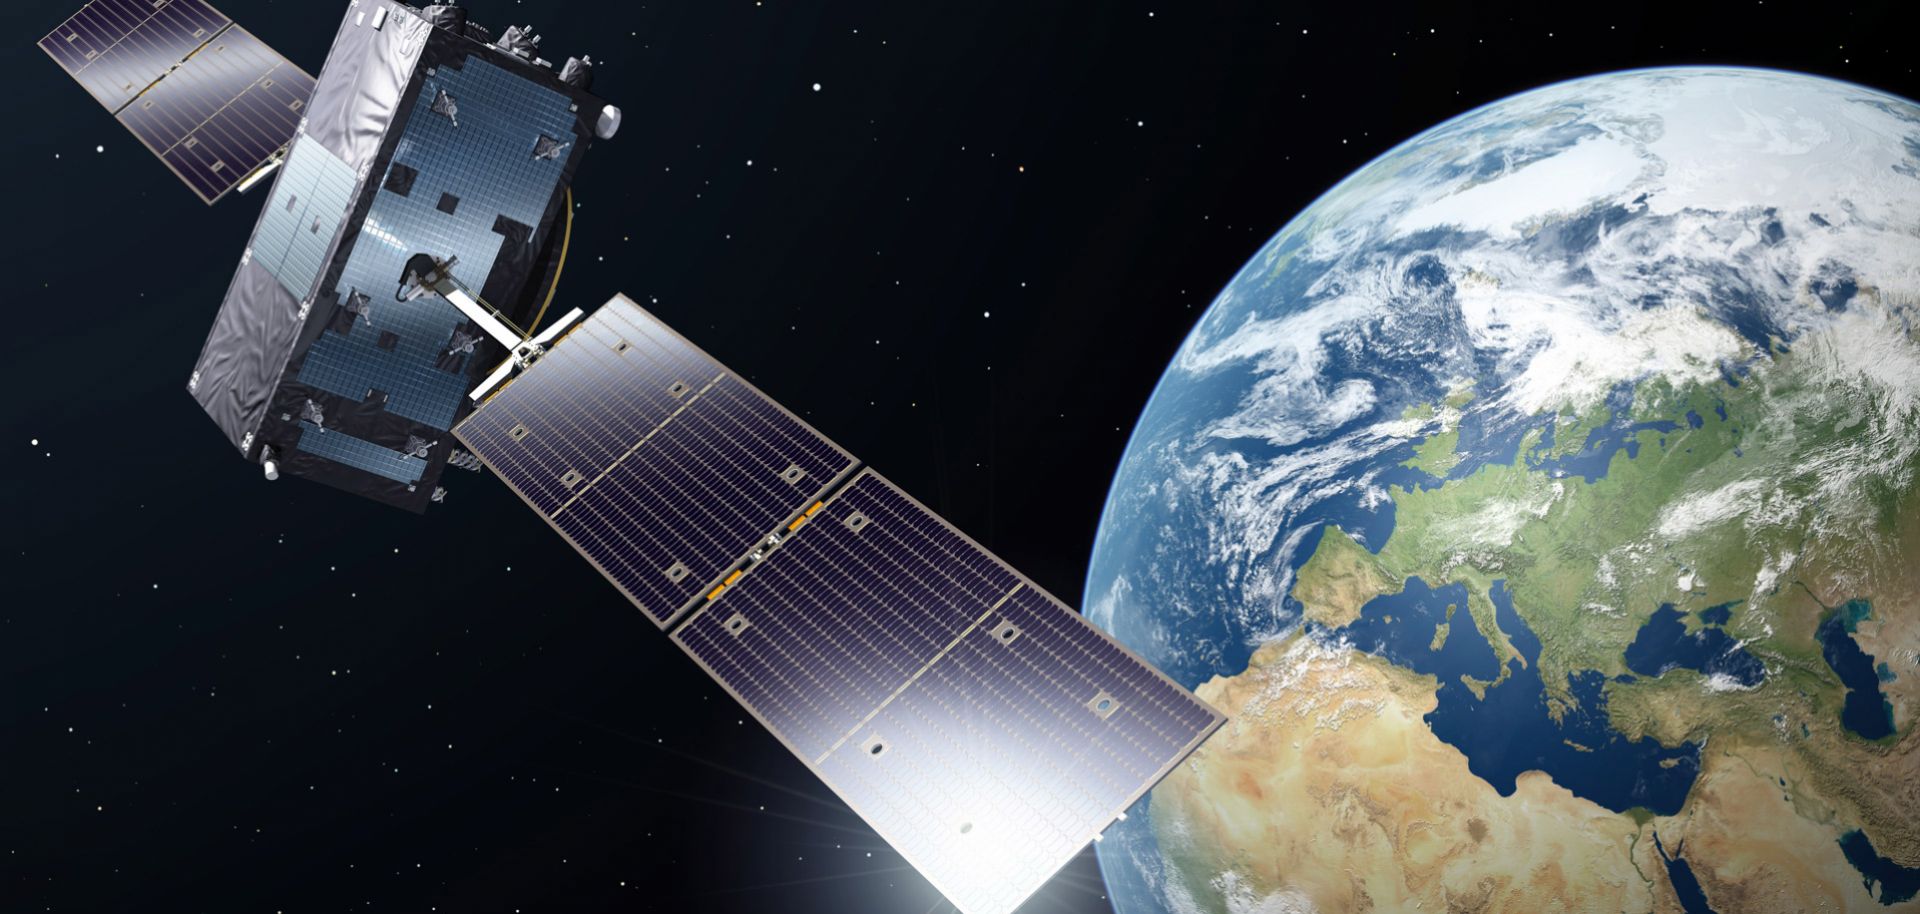 When Europe's Galileo satellite constellation becomes operational by 2020, it will provide users with highly accurate global navigation services. Still, it will not bring an end to the Continent's dependence on GPS.